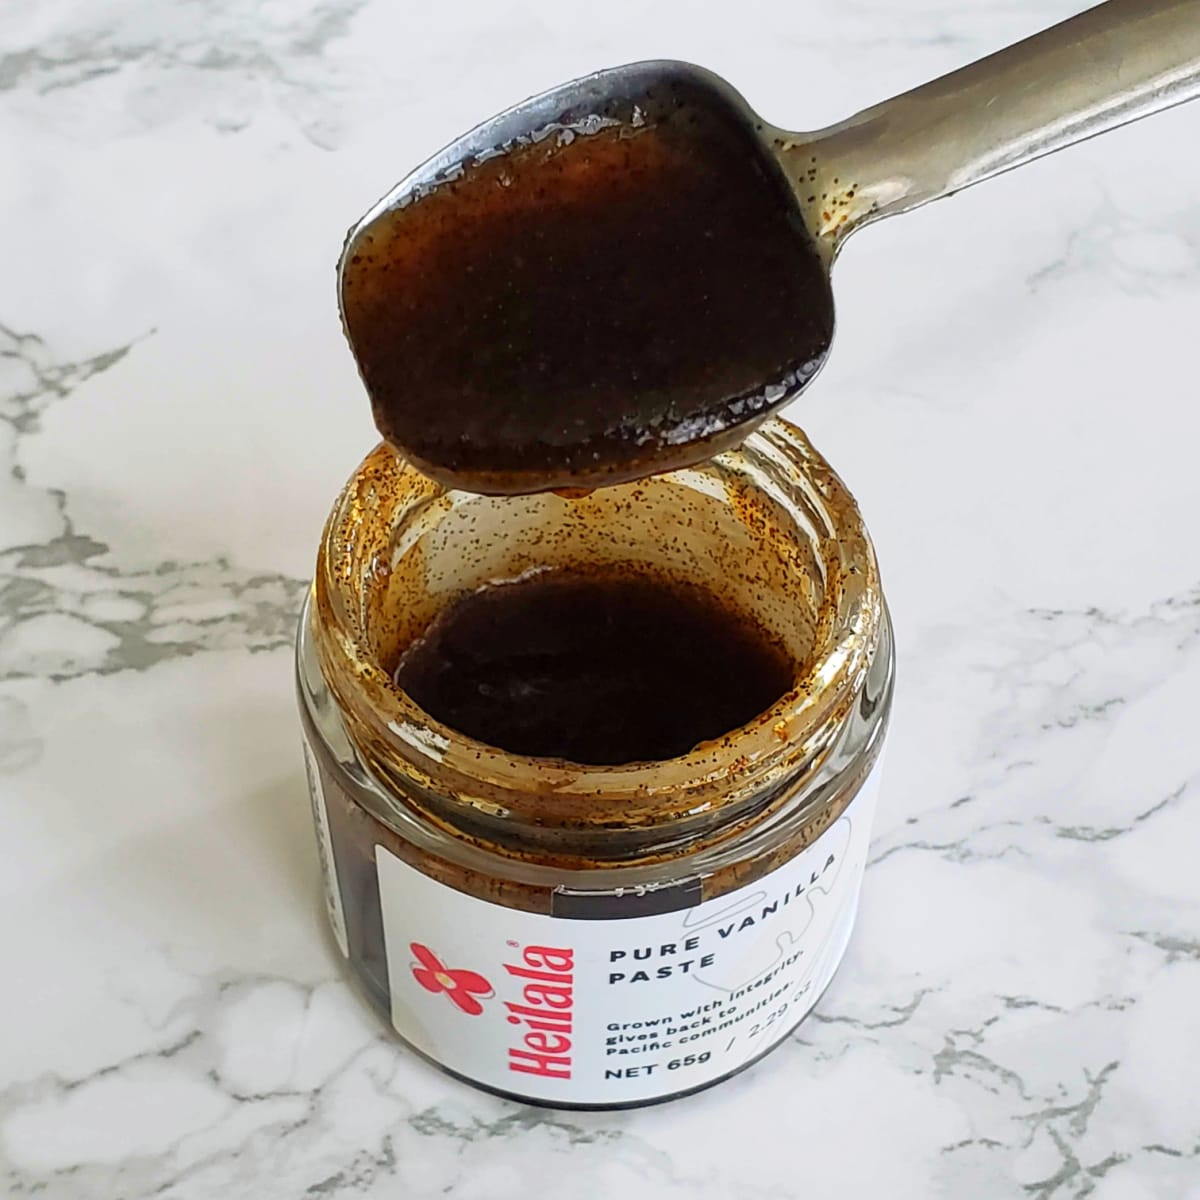 Heilala Vanilla Paste in a jar with a measuring spoon showing it